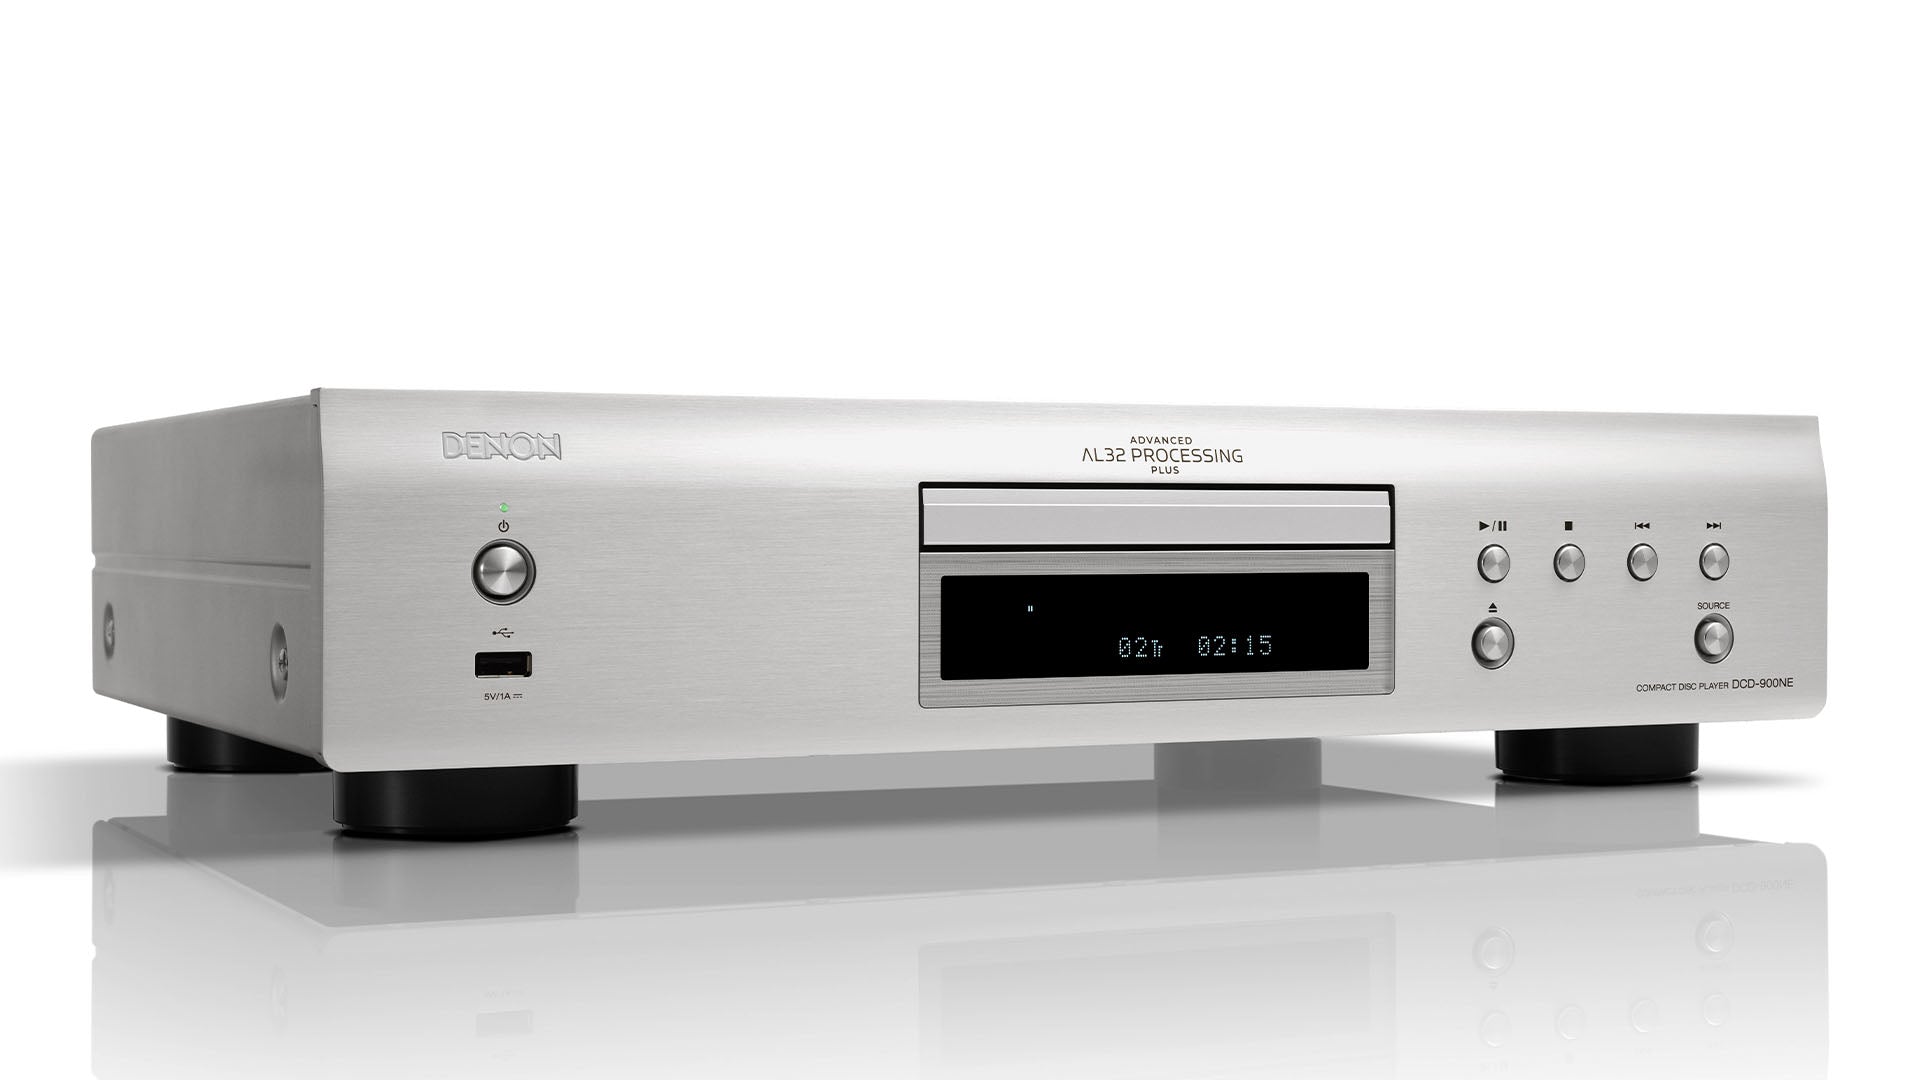 DENON DCD-900HNE CD PLAYER WITH ADVANCED AL32 PROCESSING PLUS AND USB